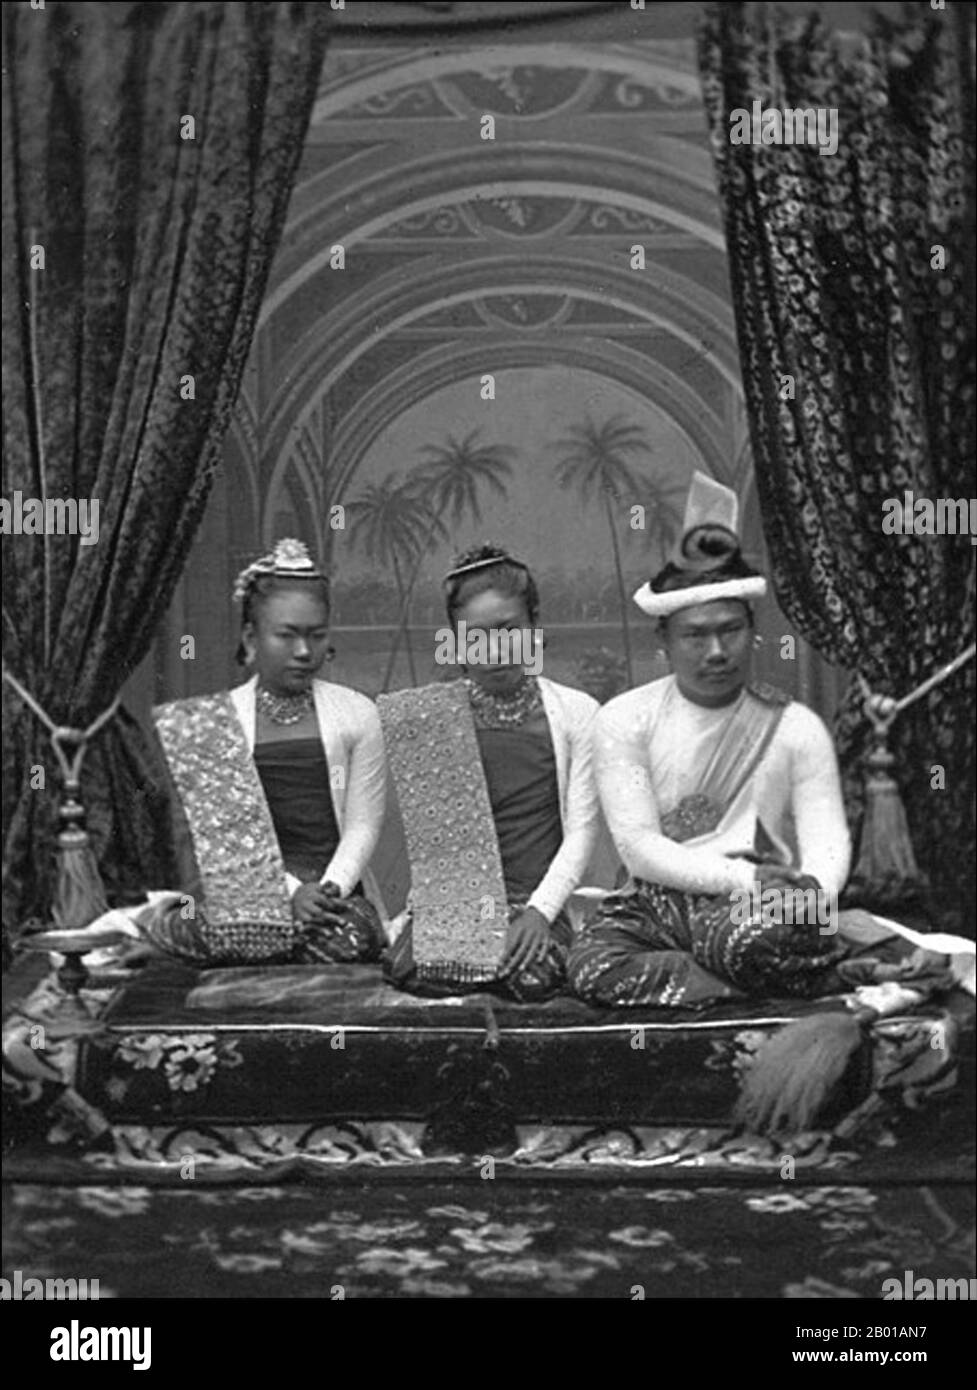 Supayalat (13 December 1859 – 24 November 1925) was the last queen of Burma  who reigned in Mandalay (1878–1885), born to King Mindon Min and Queen  Alenandaw. Their reign lasted just seven